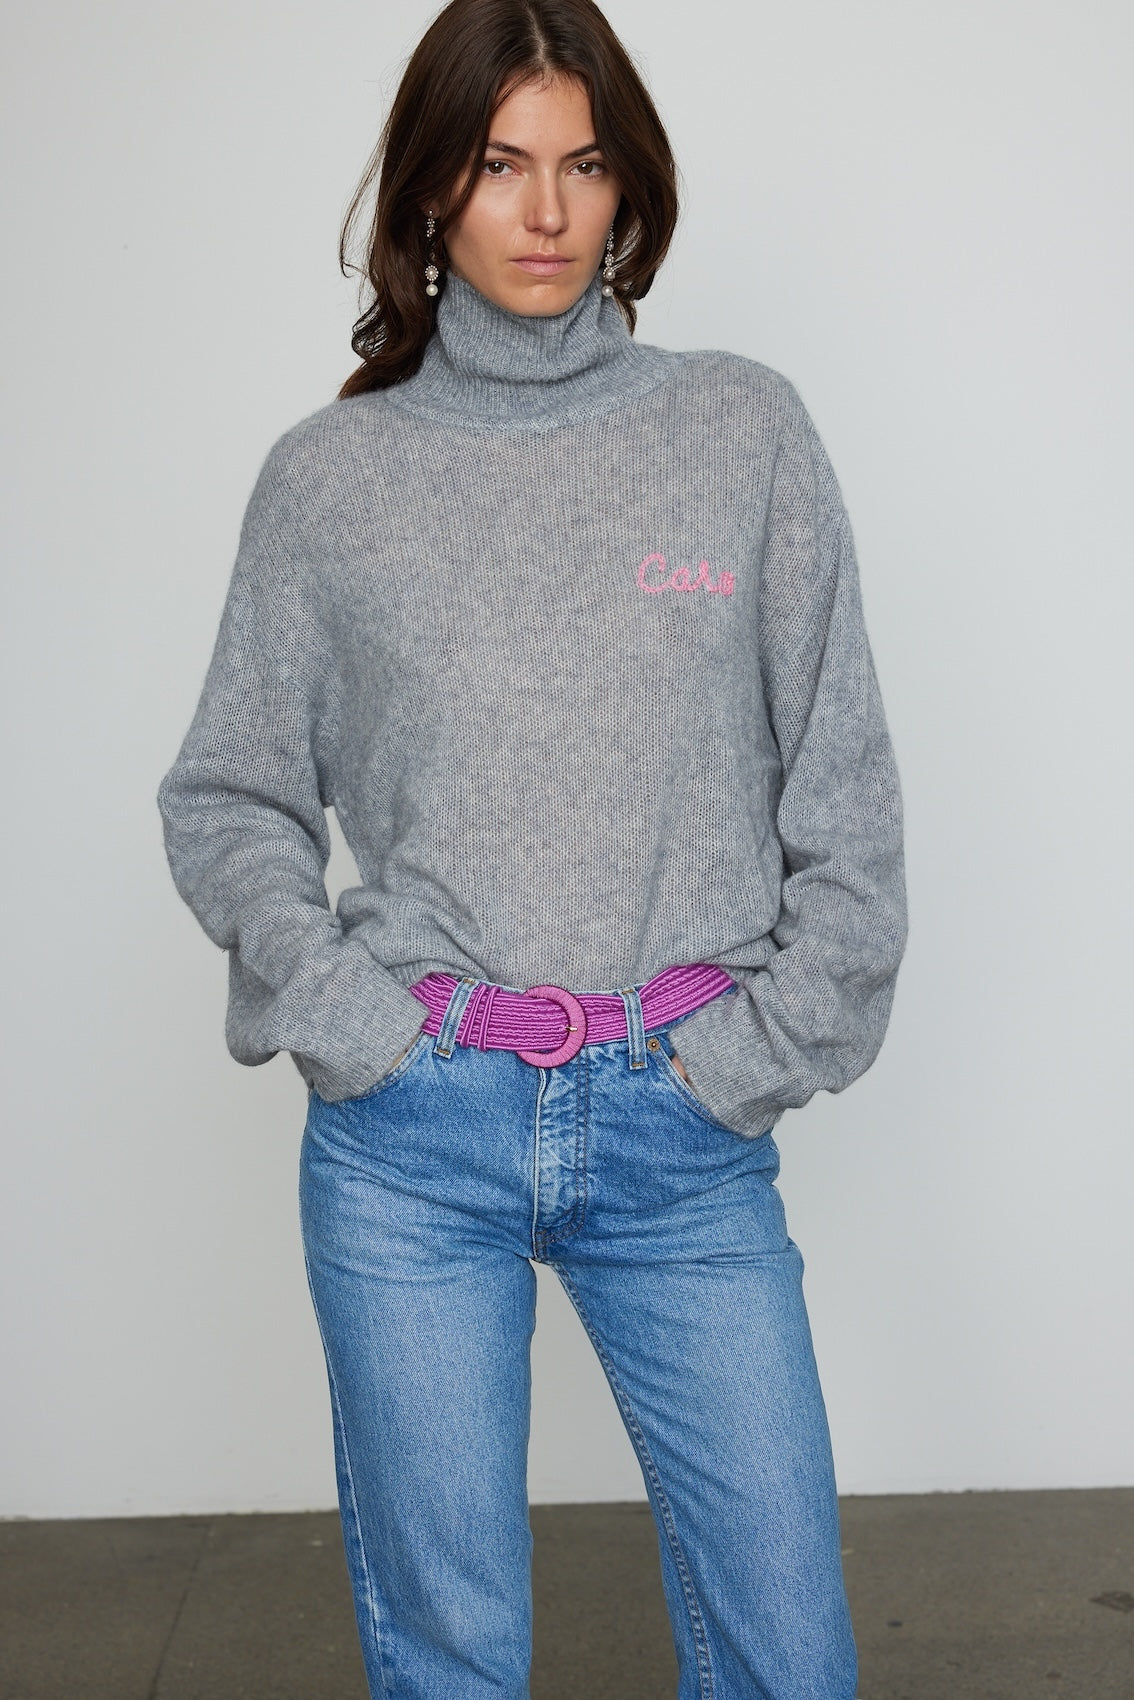 Caro Editions Ultra-soft, light-weight, oversized roll-neck sweater made from cashmere silk yarn. A versatile piece, to carry you through the changing seasons. Material: 75% Cashmere, 25% Silk.